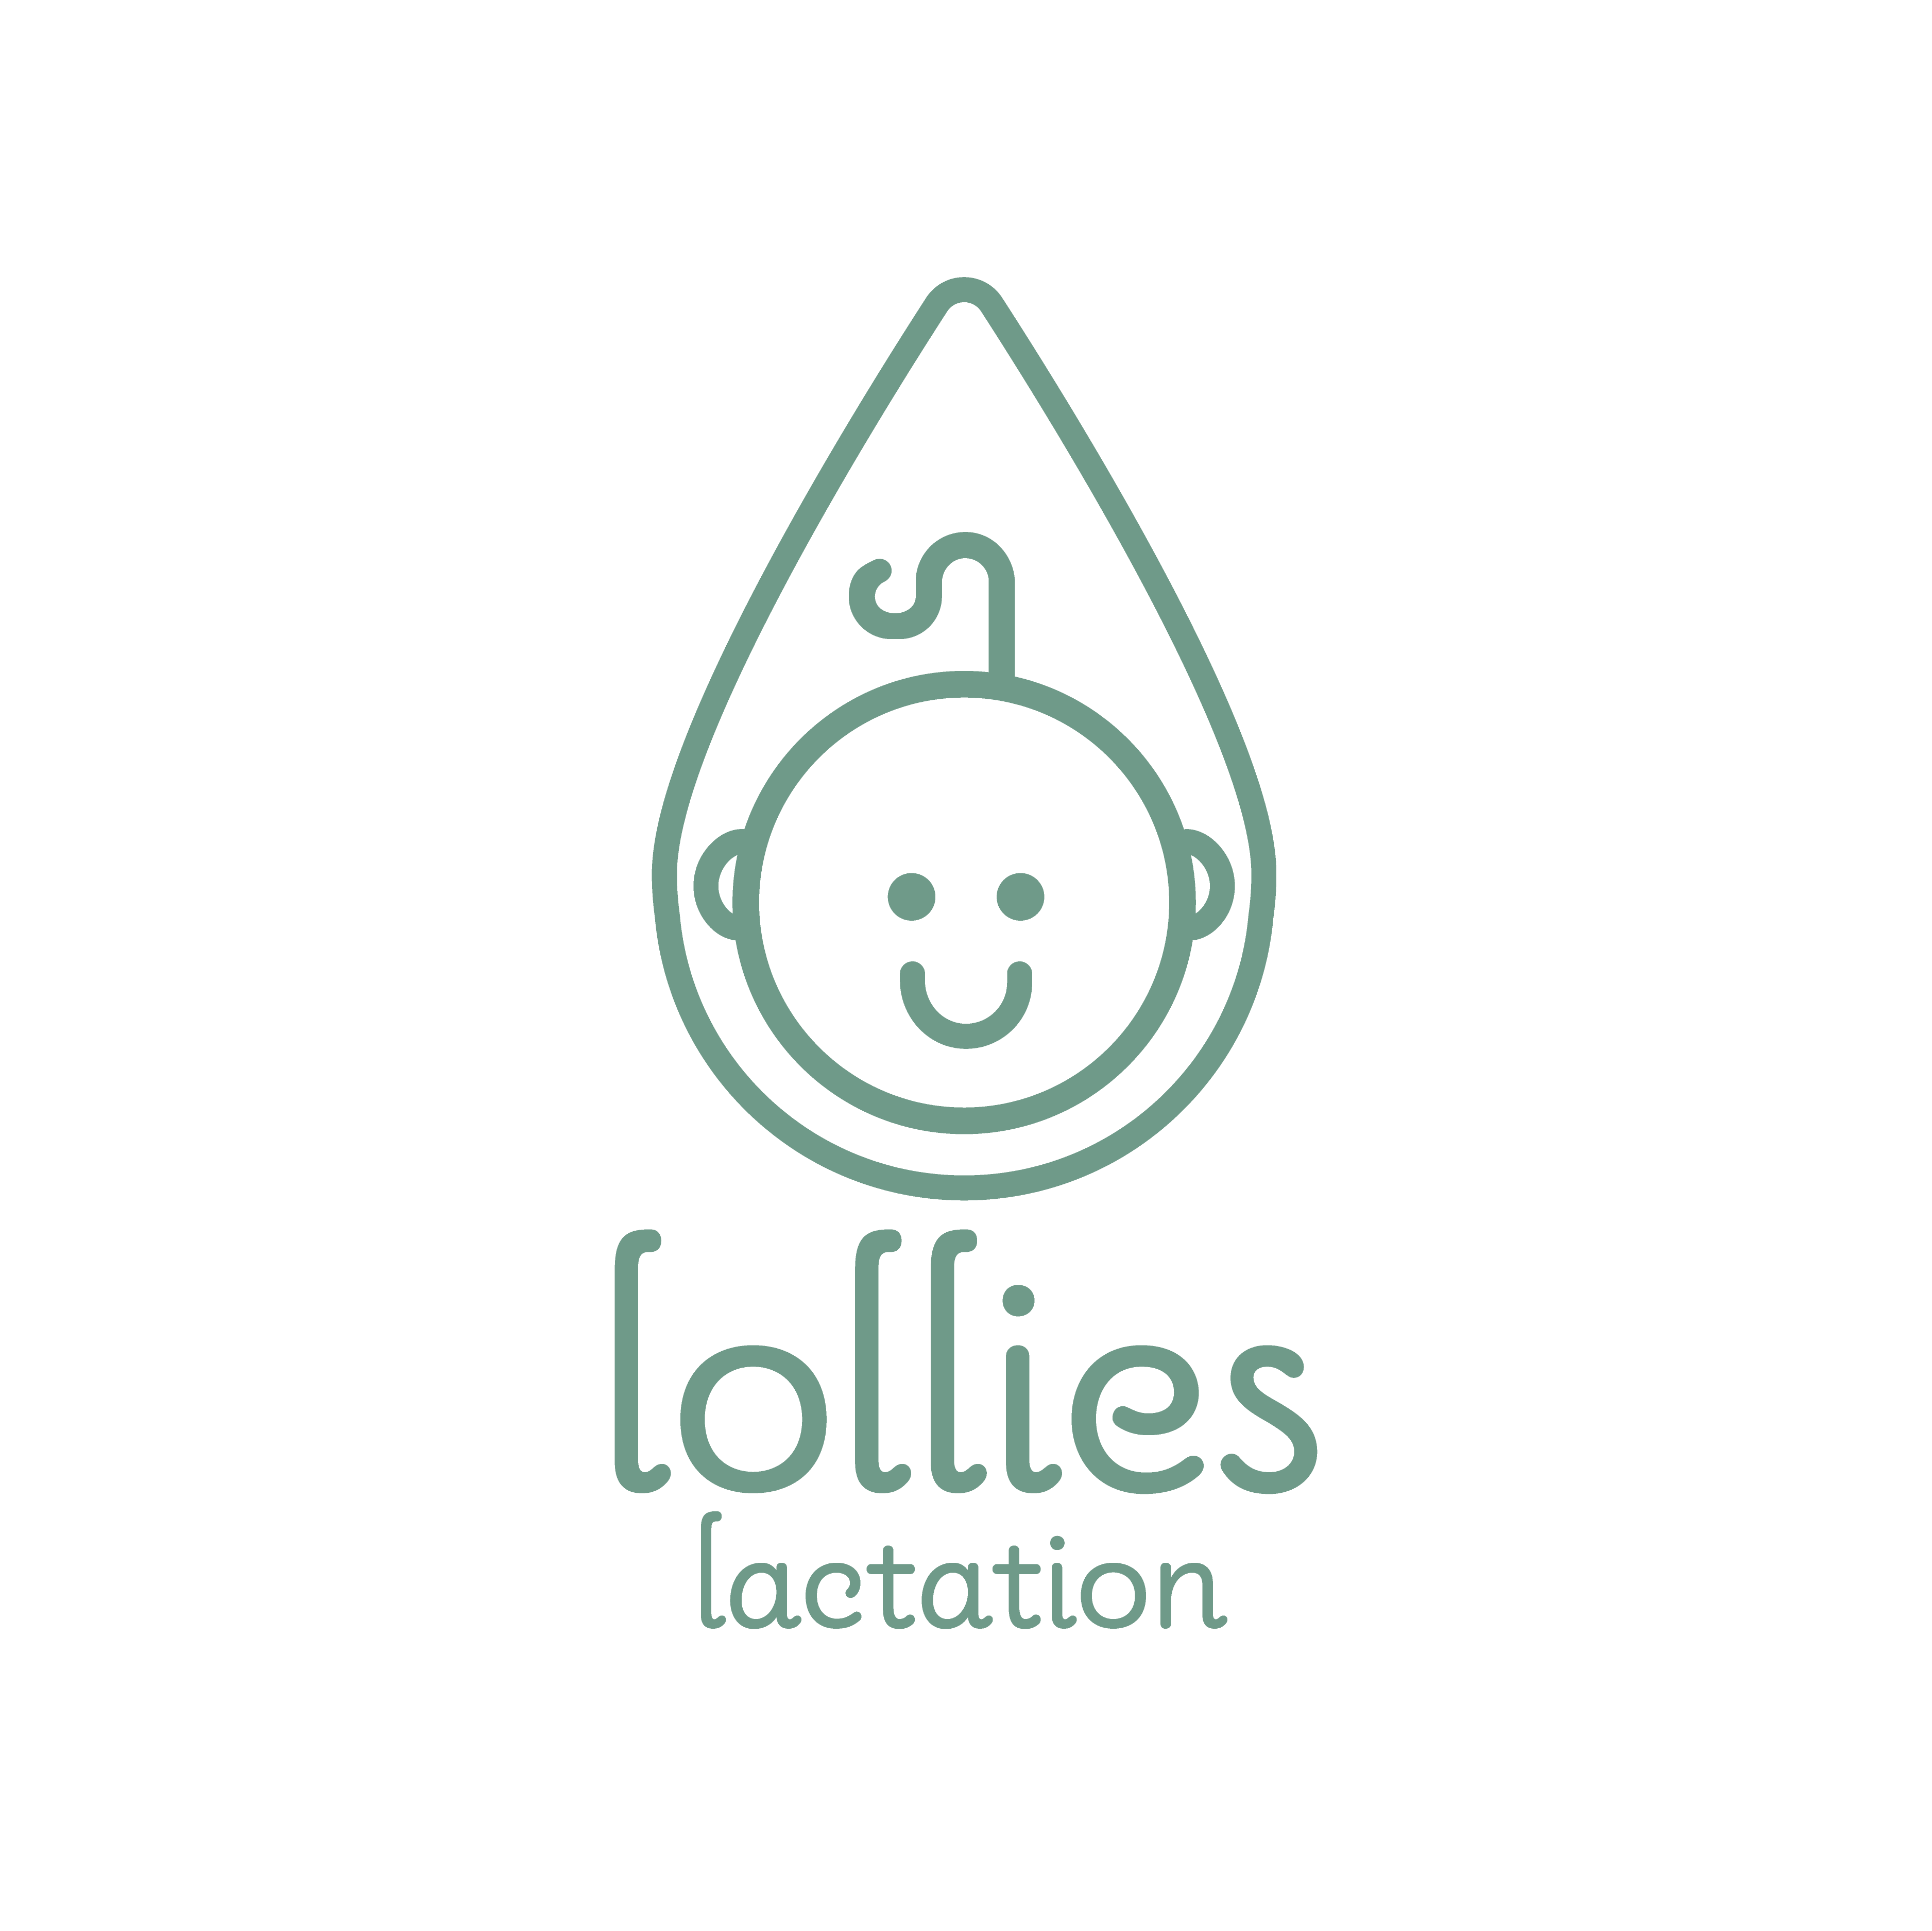 Lollies Lactation logo design by logo designer Logarhythm Creative for your inspiration and for the worlds largest logo competition